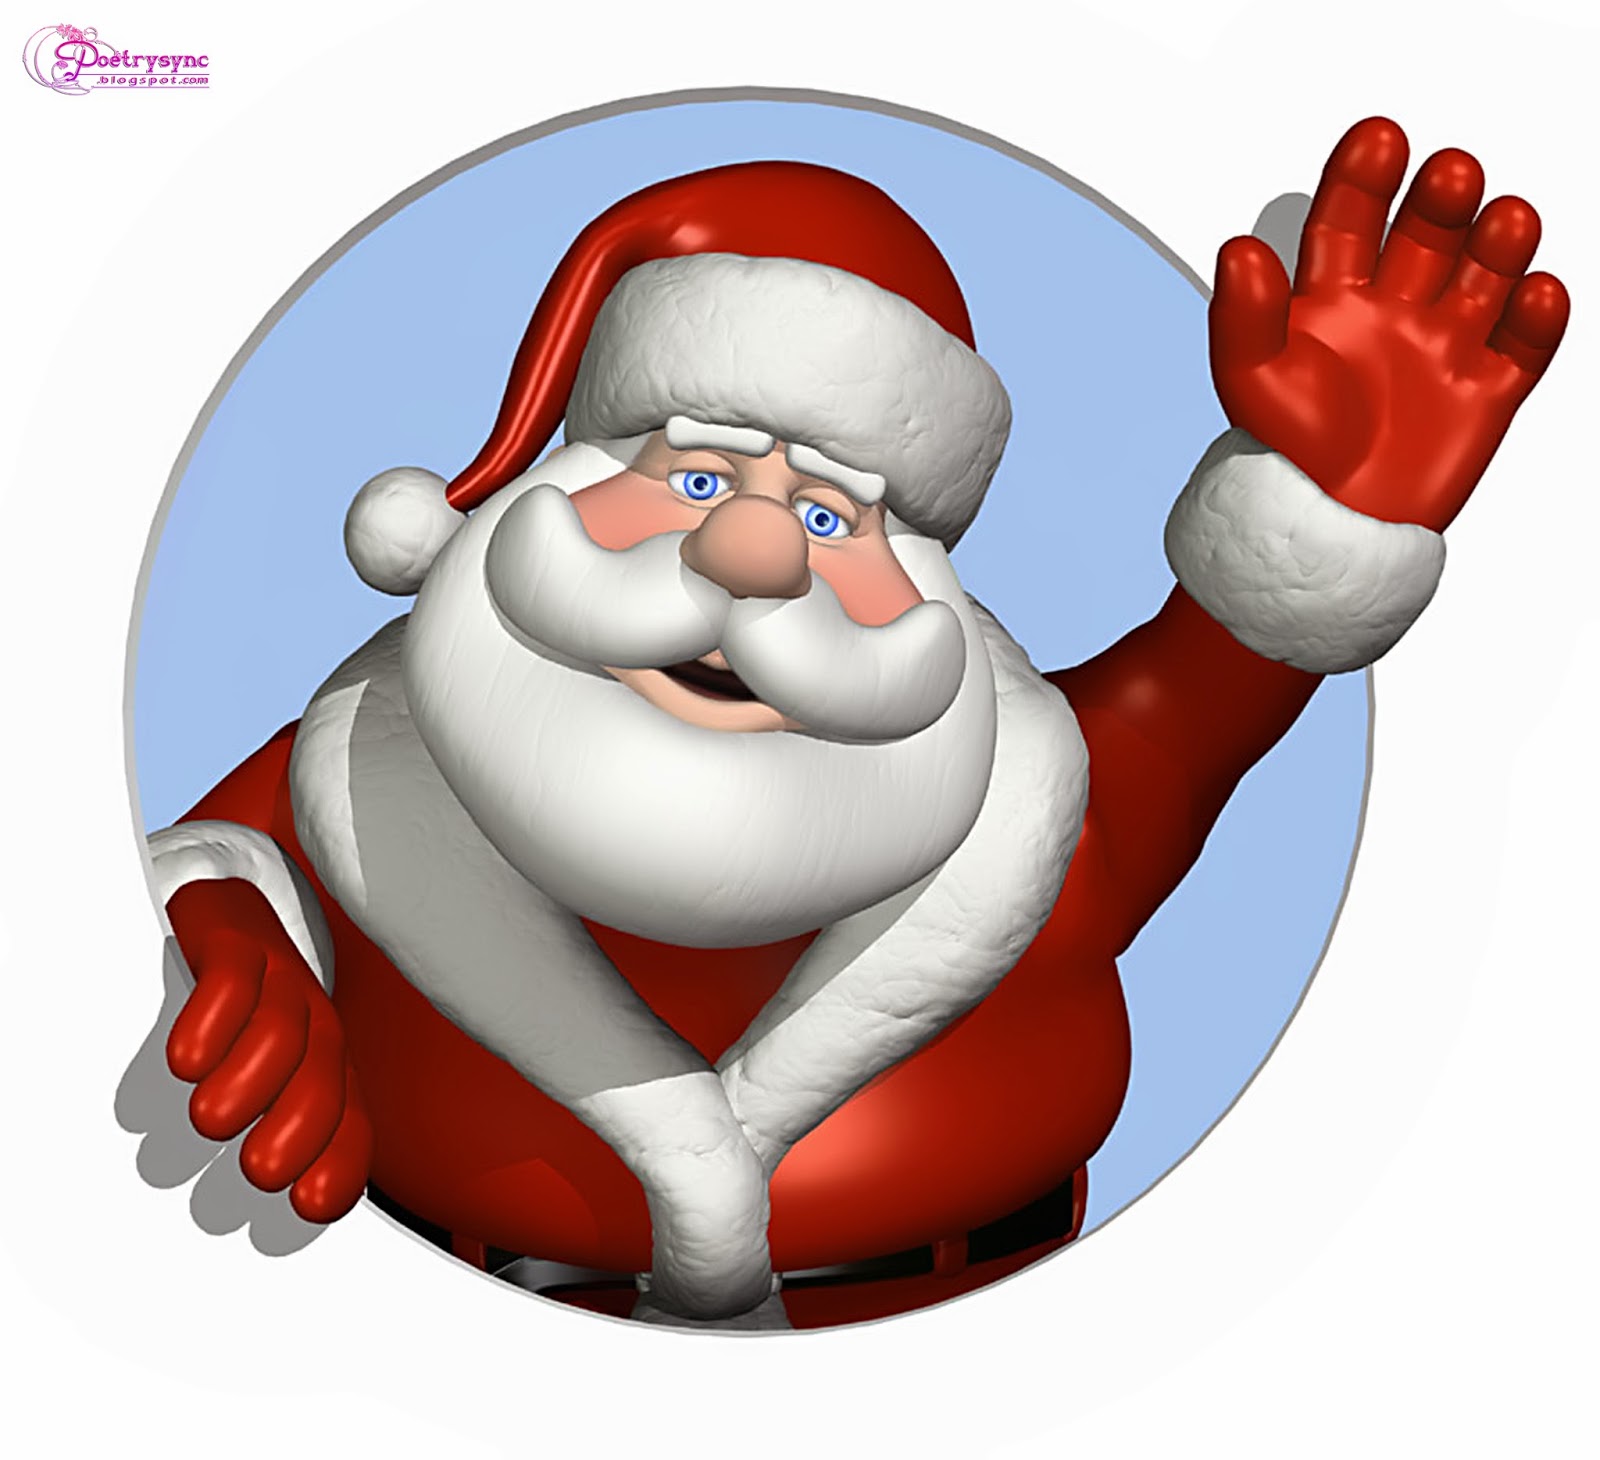 Santa claus hd cliparts and pictures for christmas festival new